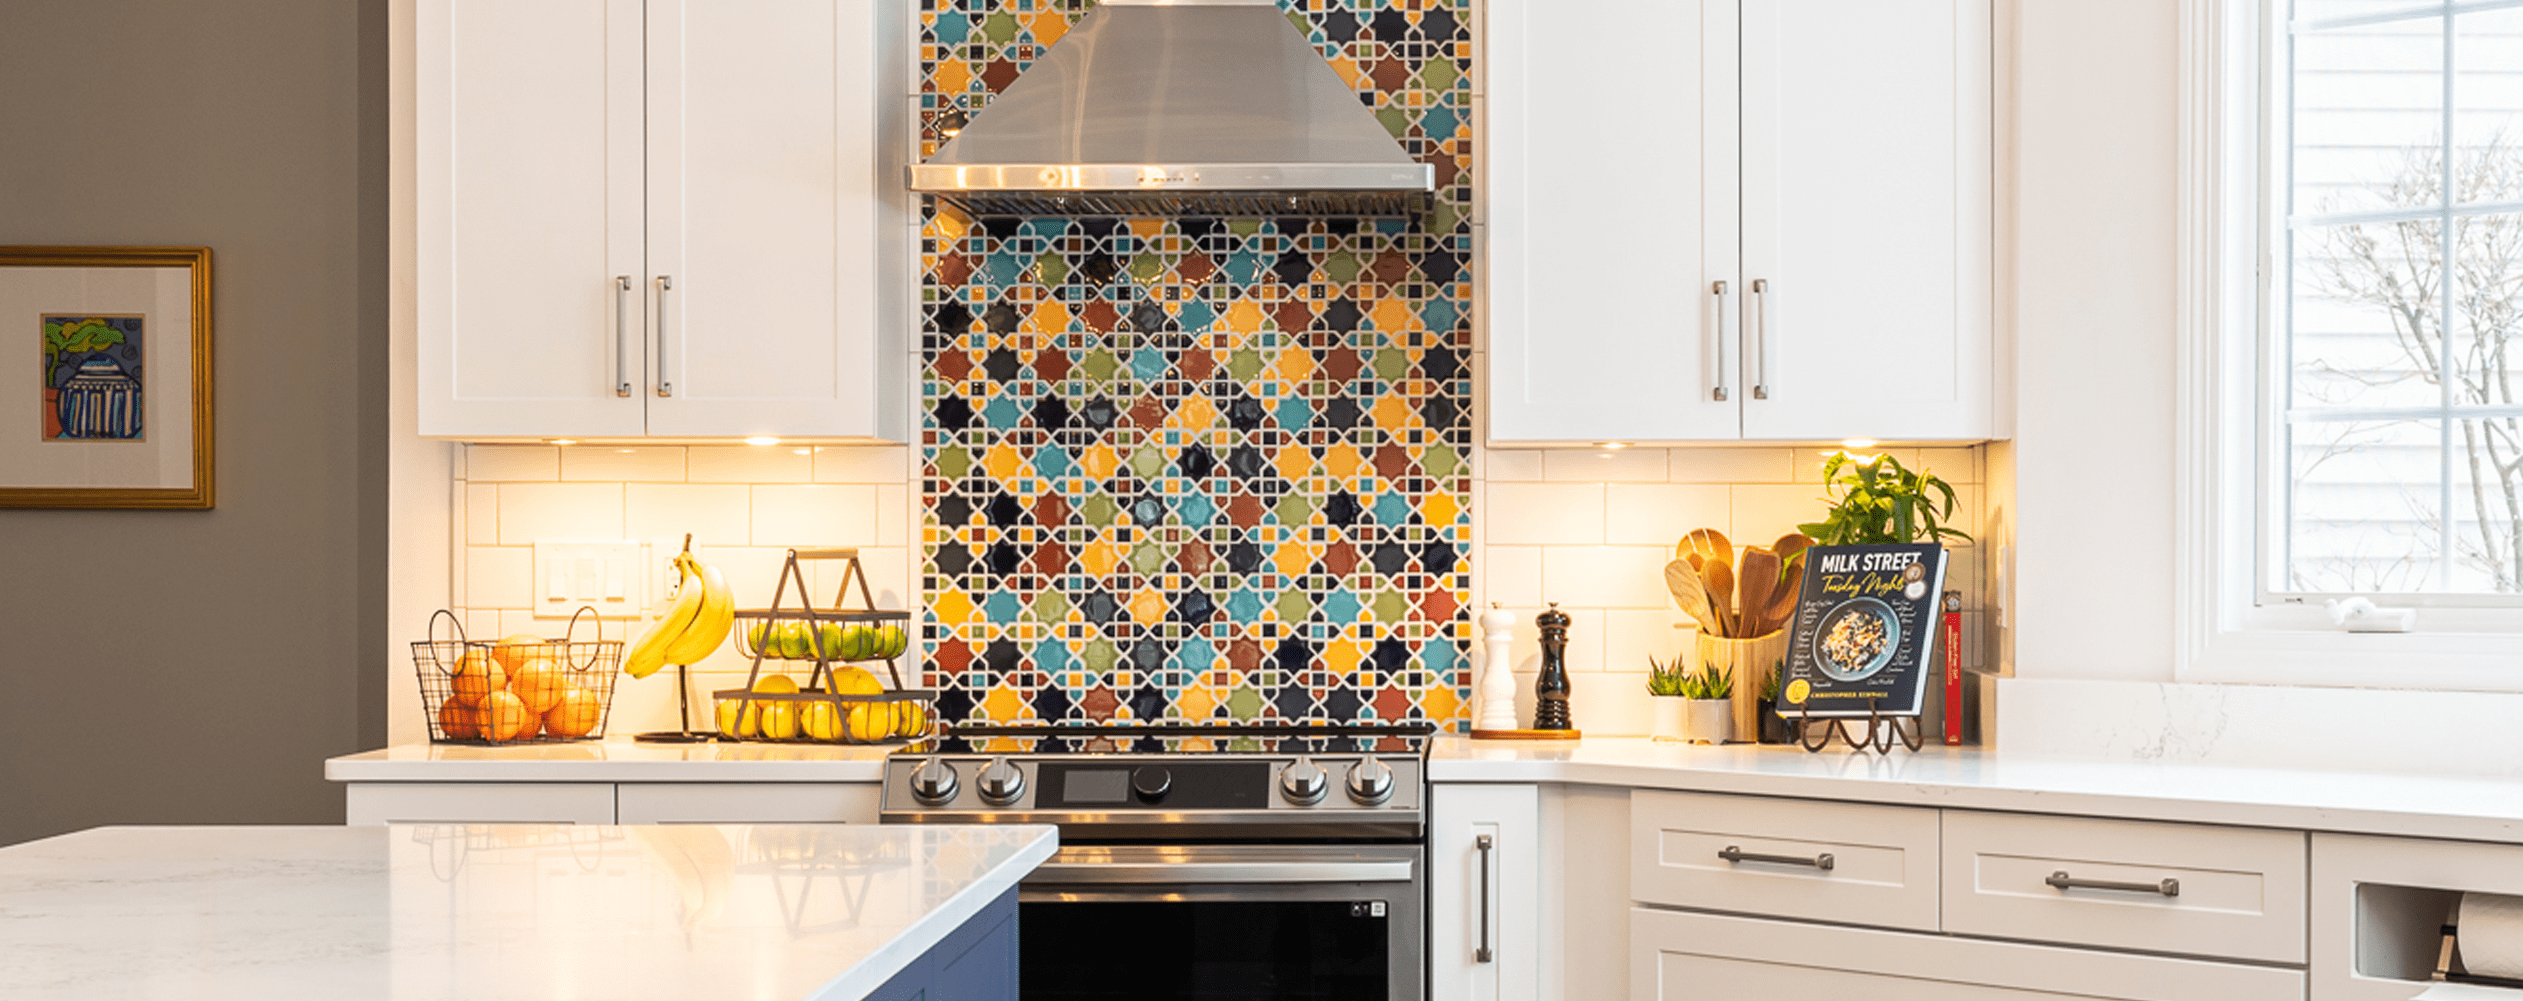 A remodeled kitchen in Chagrin Falls features attractive mosaics.